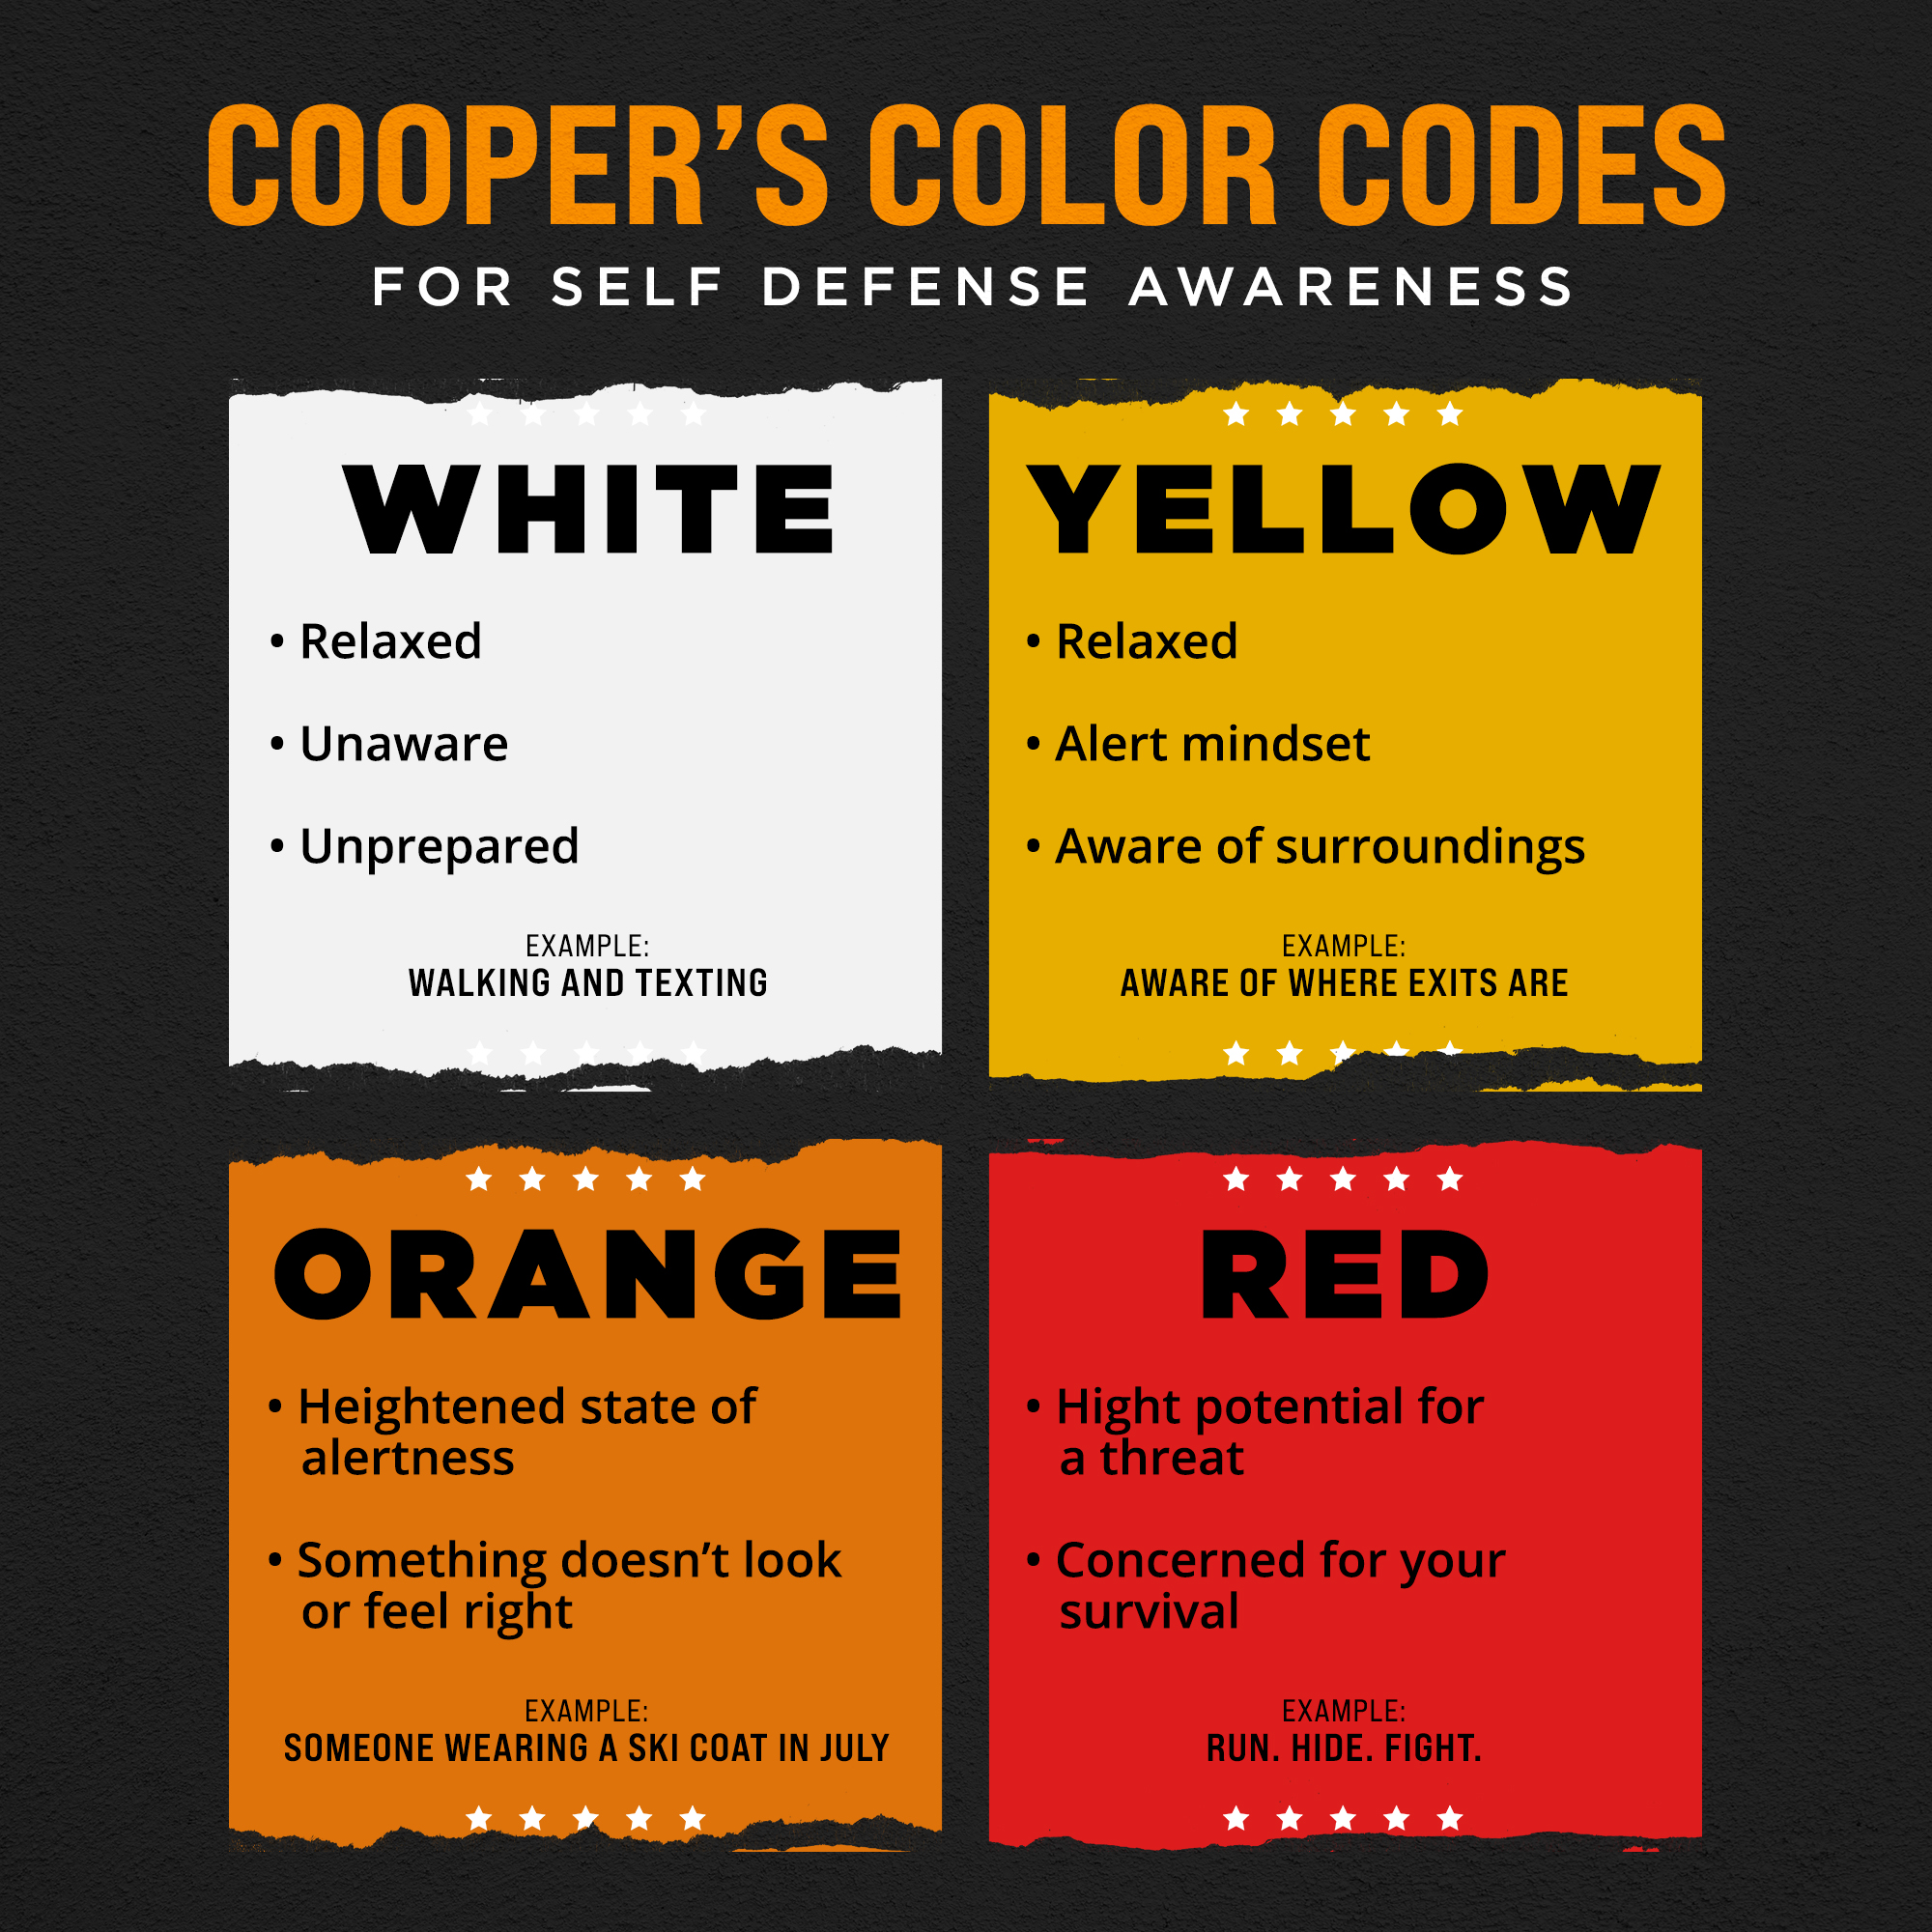 Cooper's Color Codes for Self Defense Awareness